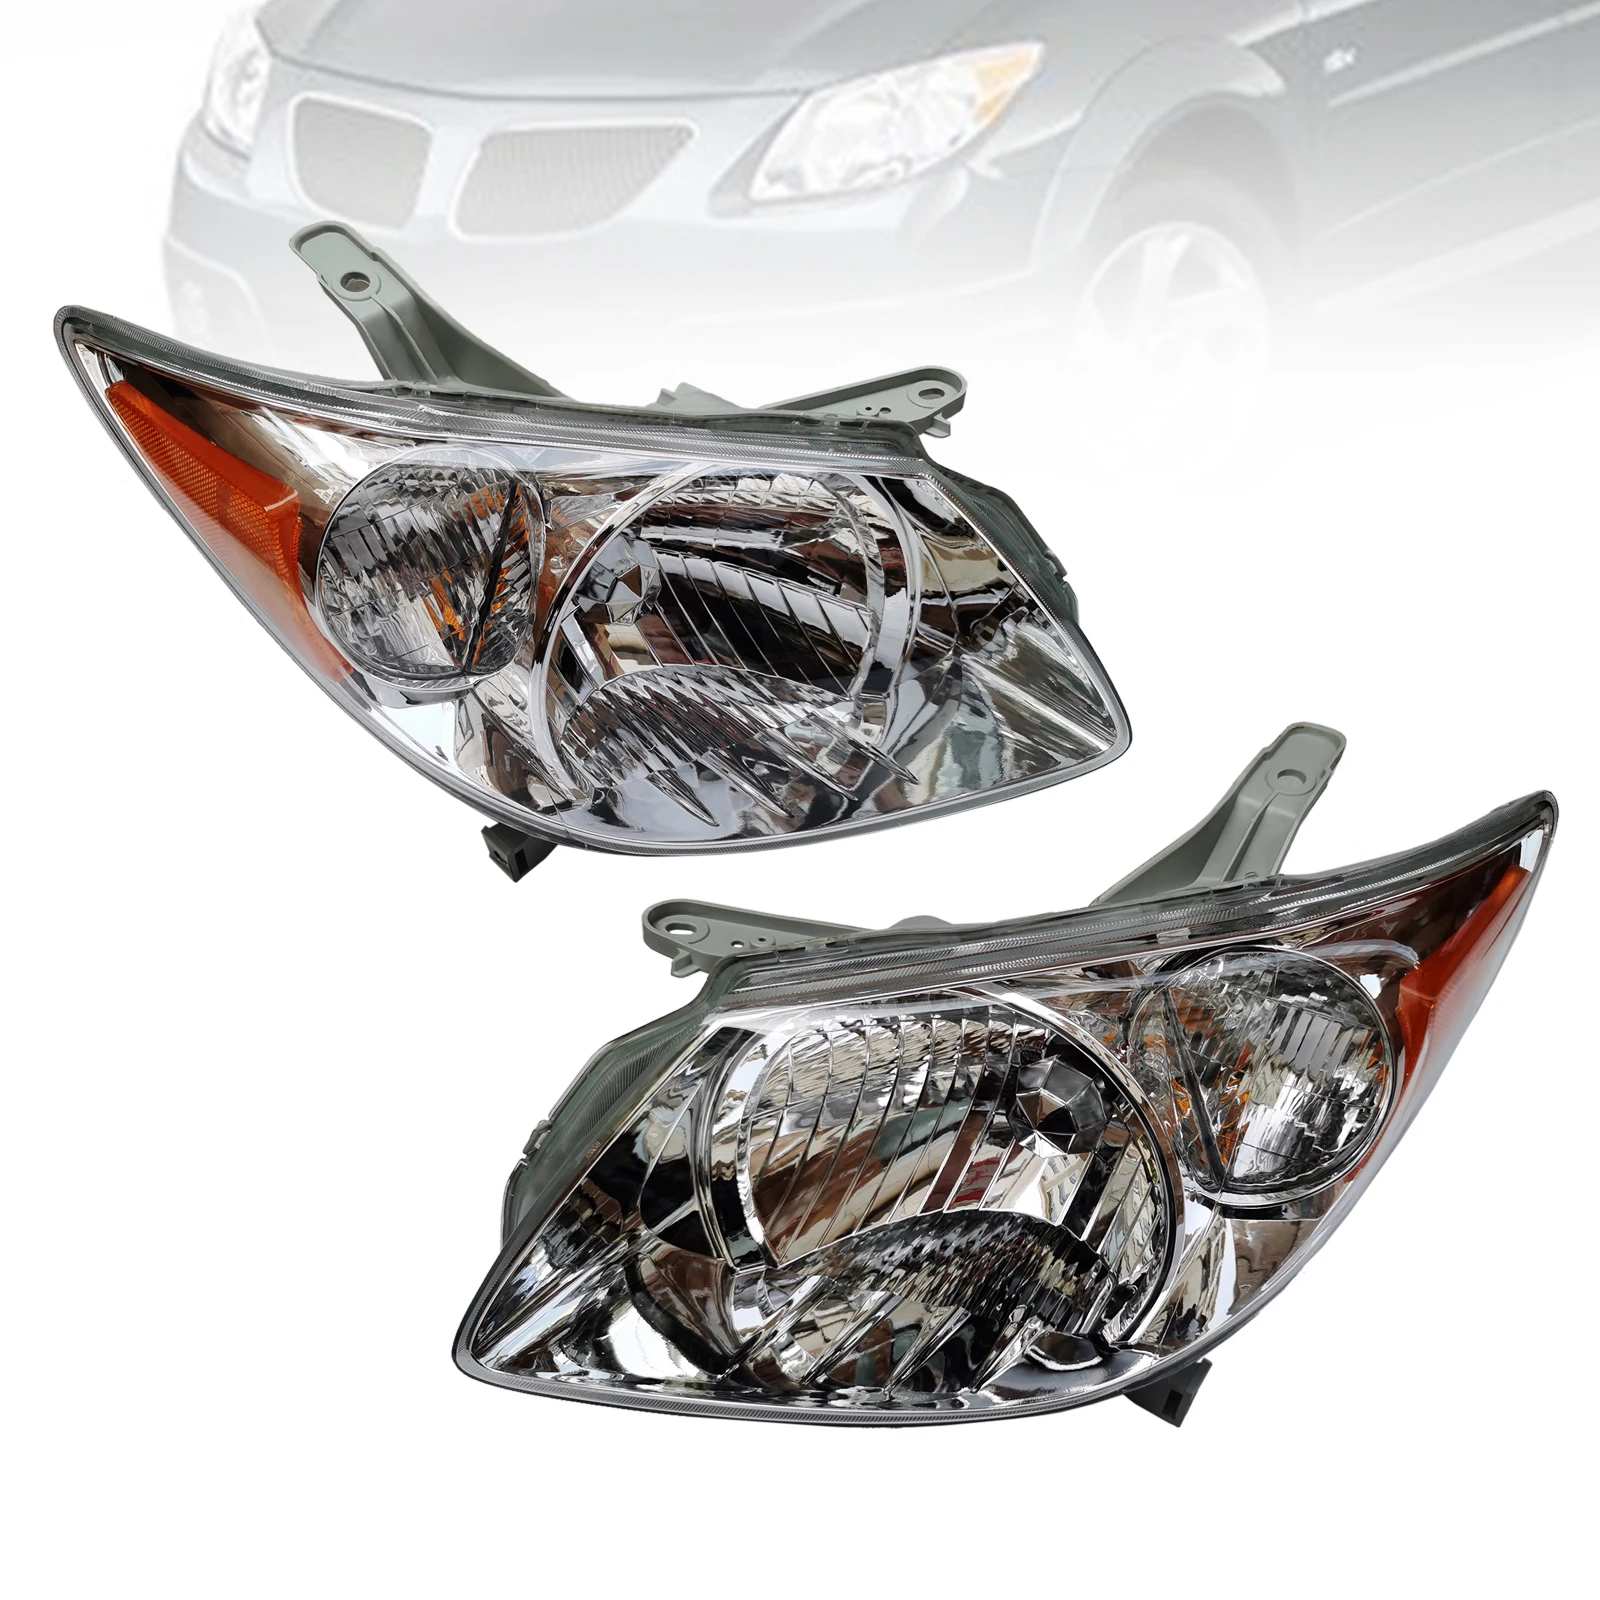 

1 Pair Car Headlights for 2005 2006 2007 2008 Pontiac Vibe Wagon Left and Right with Bulb